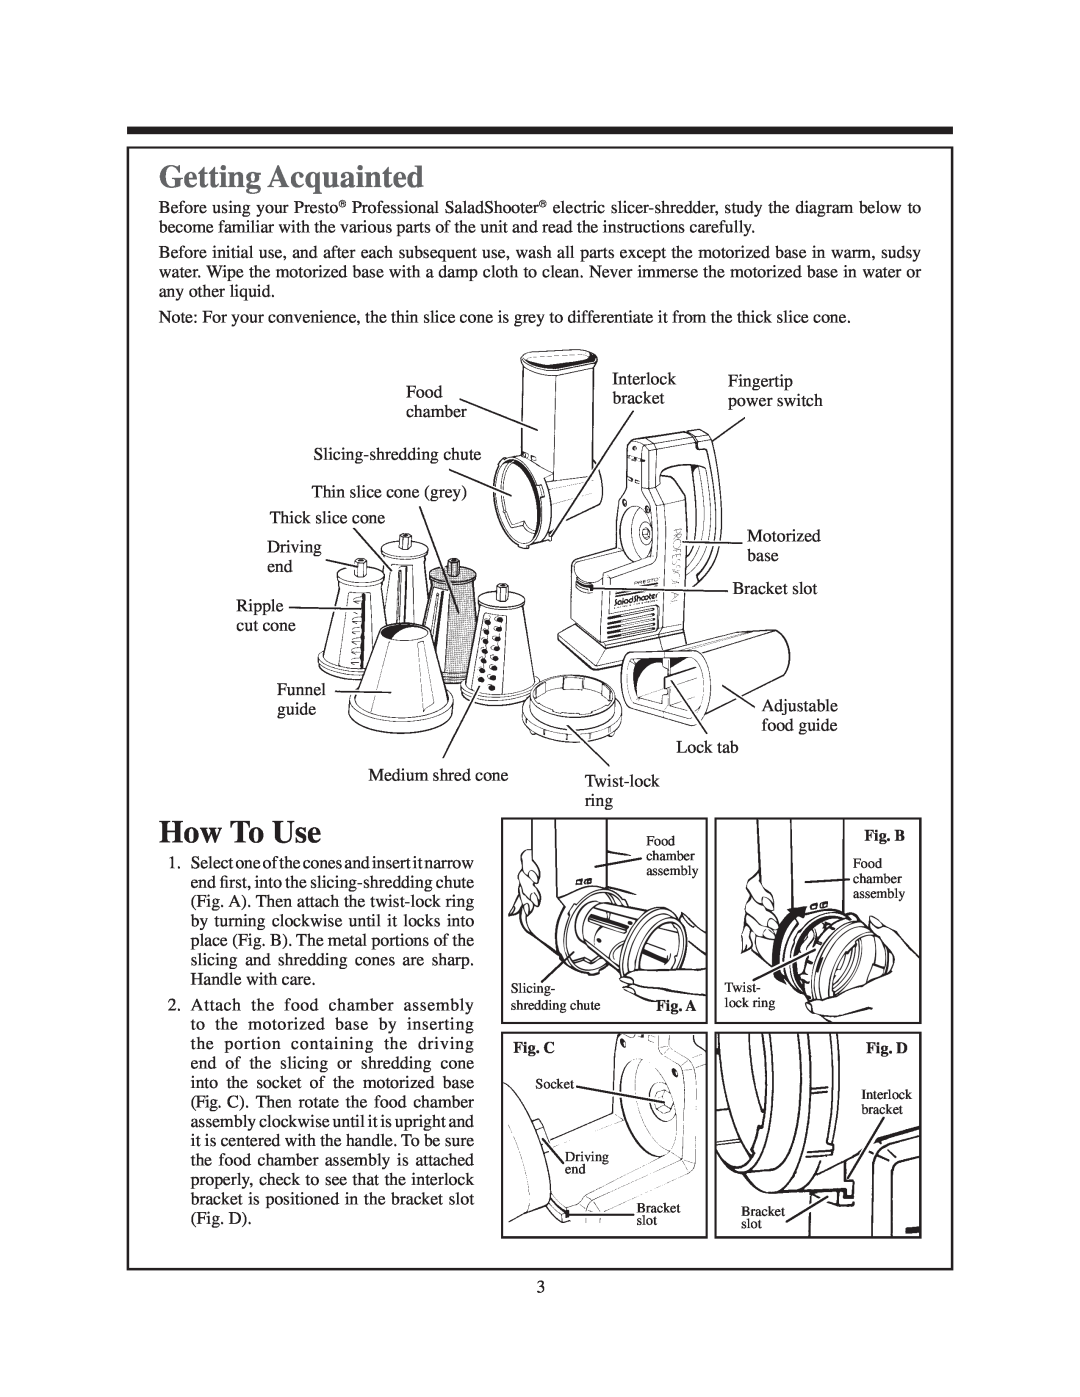 Presto electric slicer-shredder manual How To Use, Getting Acquainted 